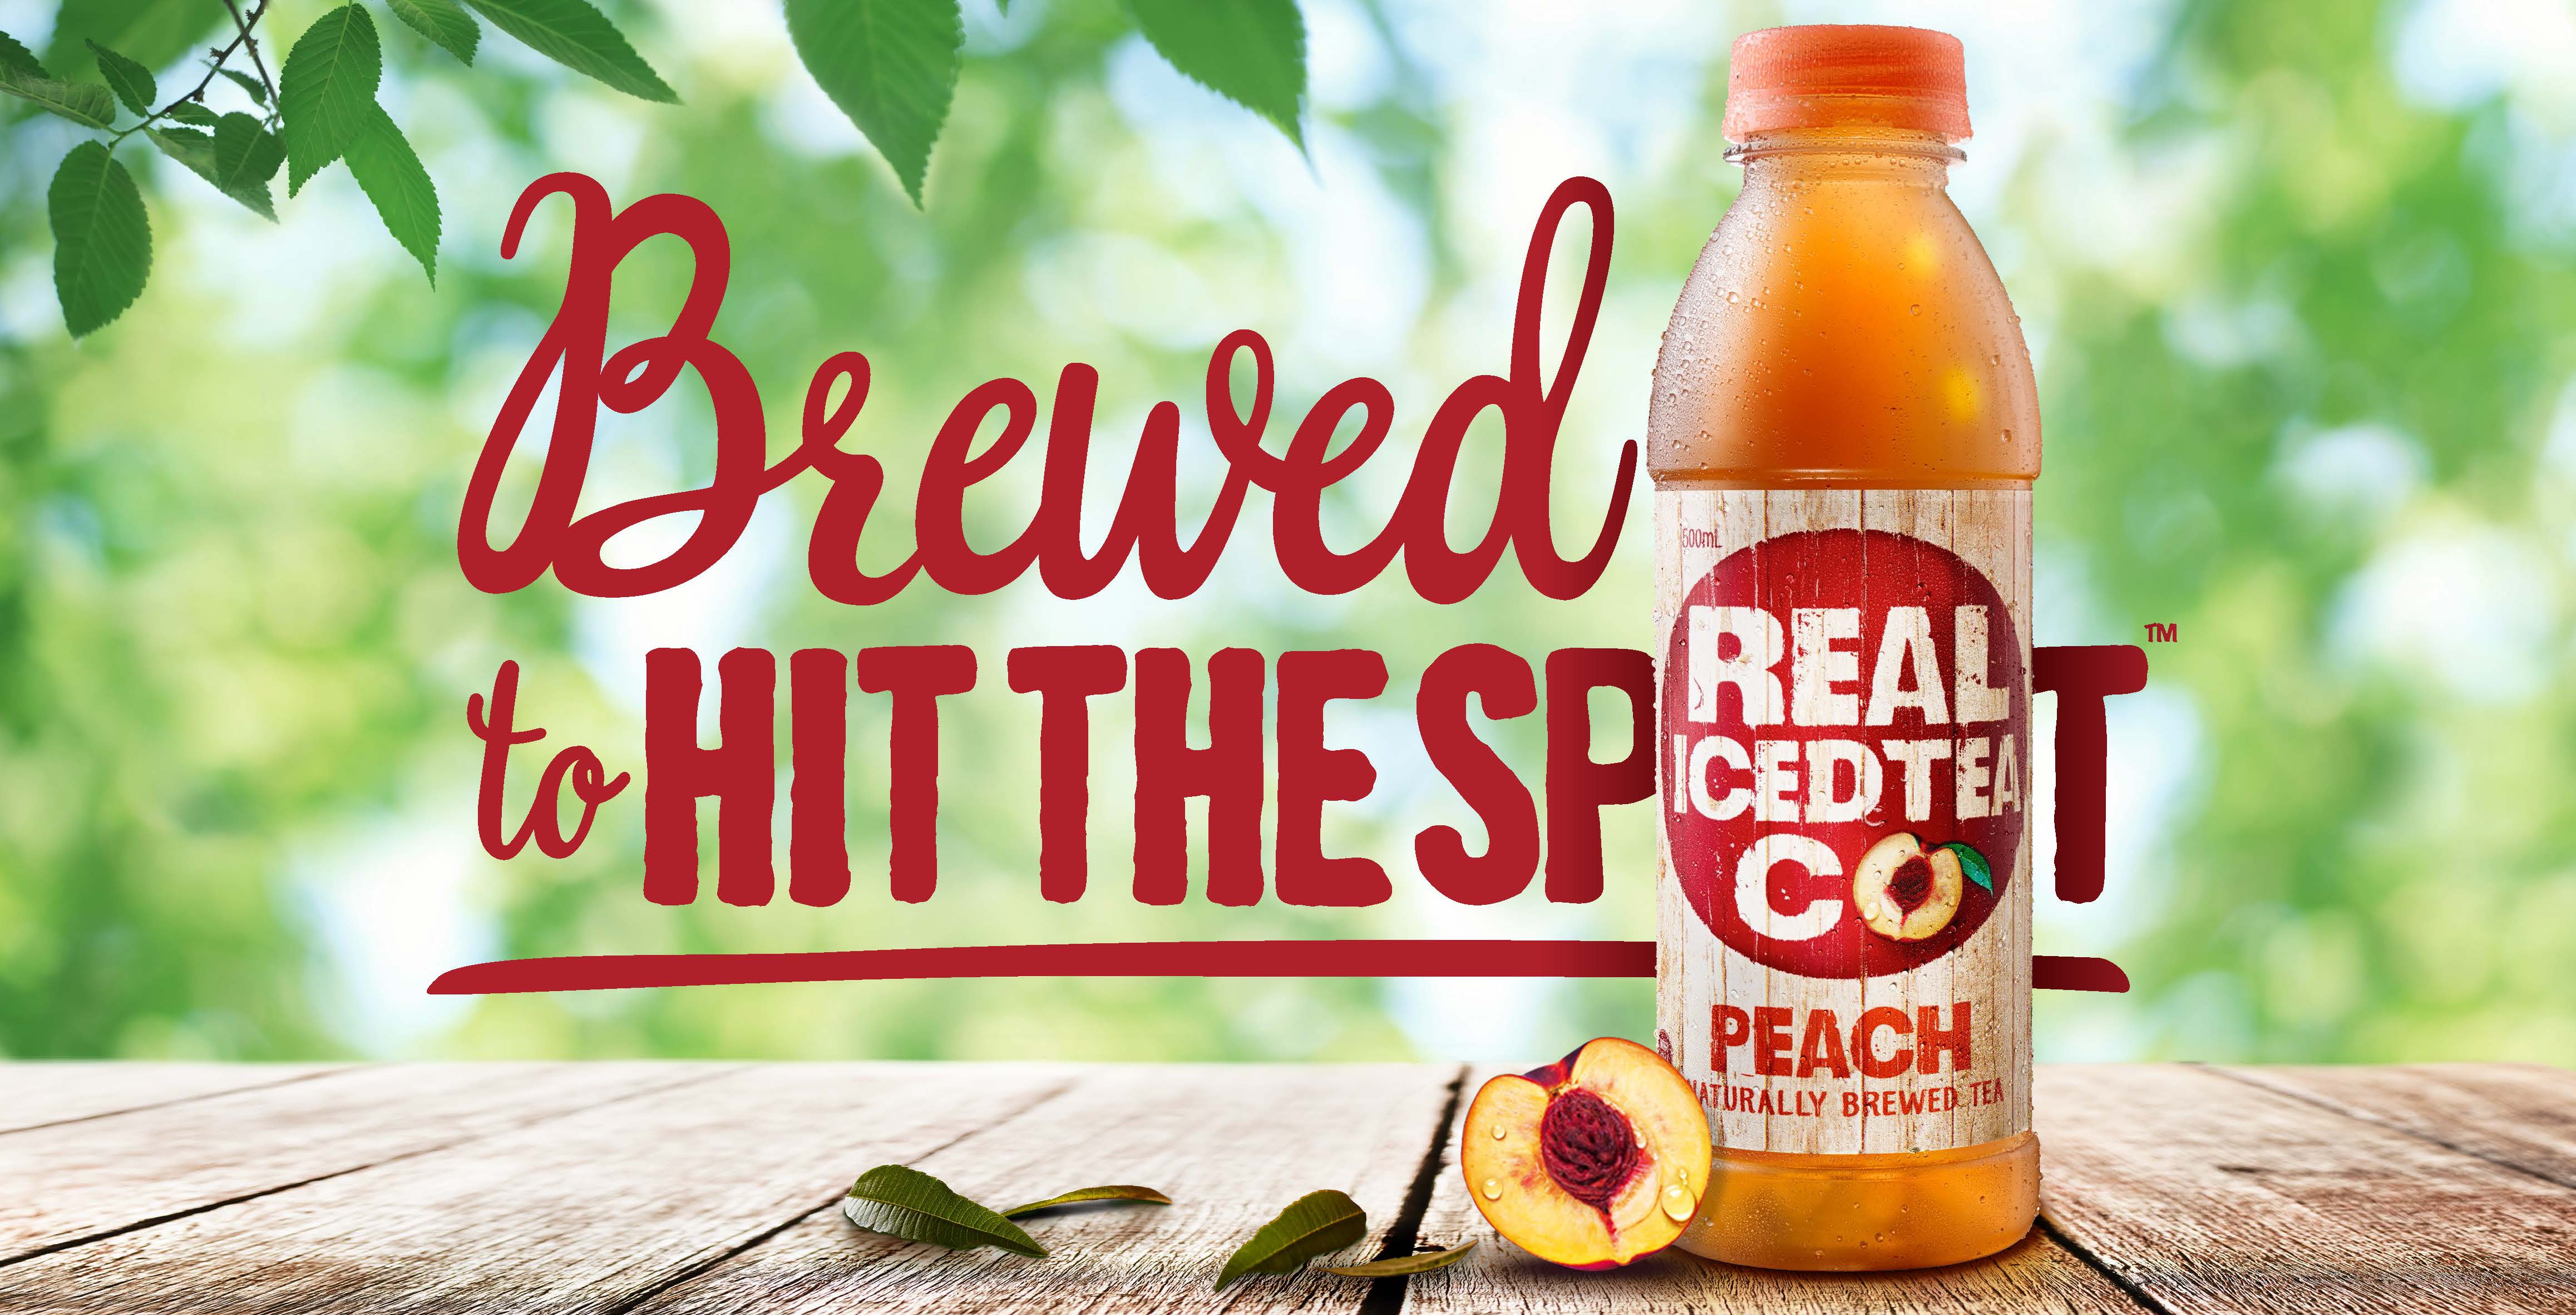 BWM Dentsu Wins Real Iced Tea Co & ‘Hits the Spot’ with Refreshing New Campaign